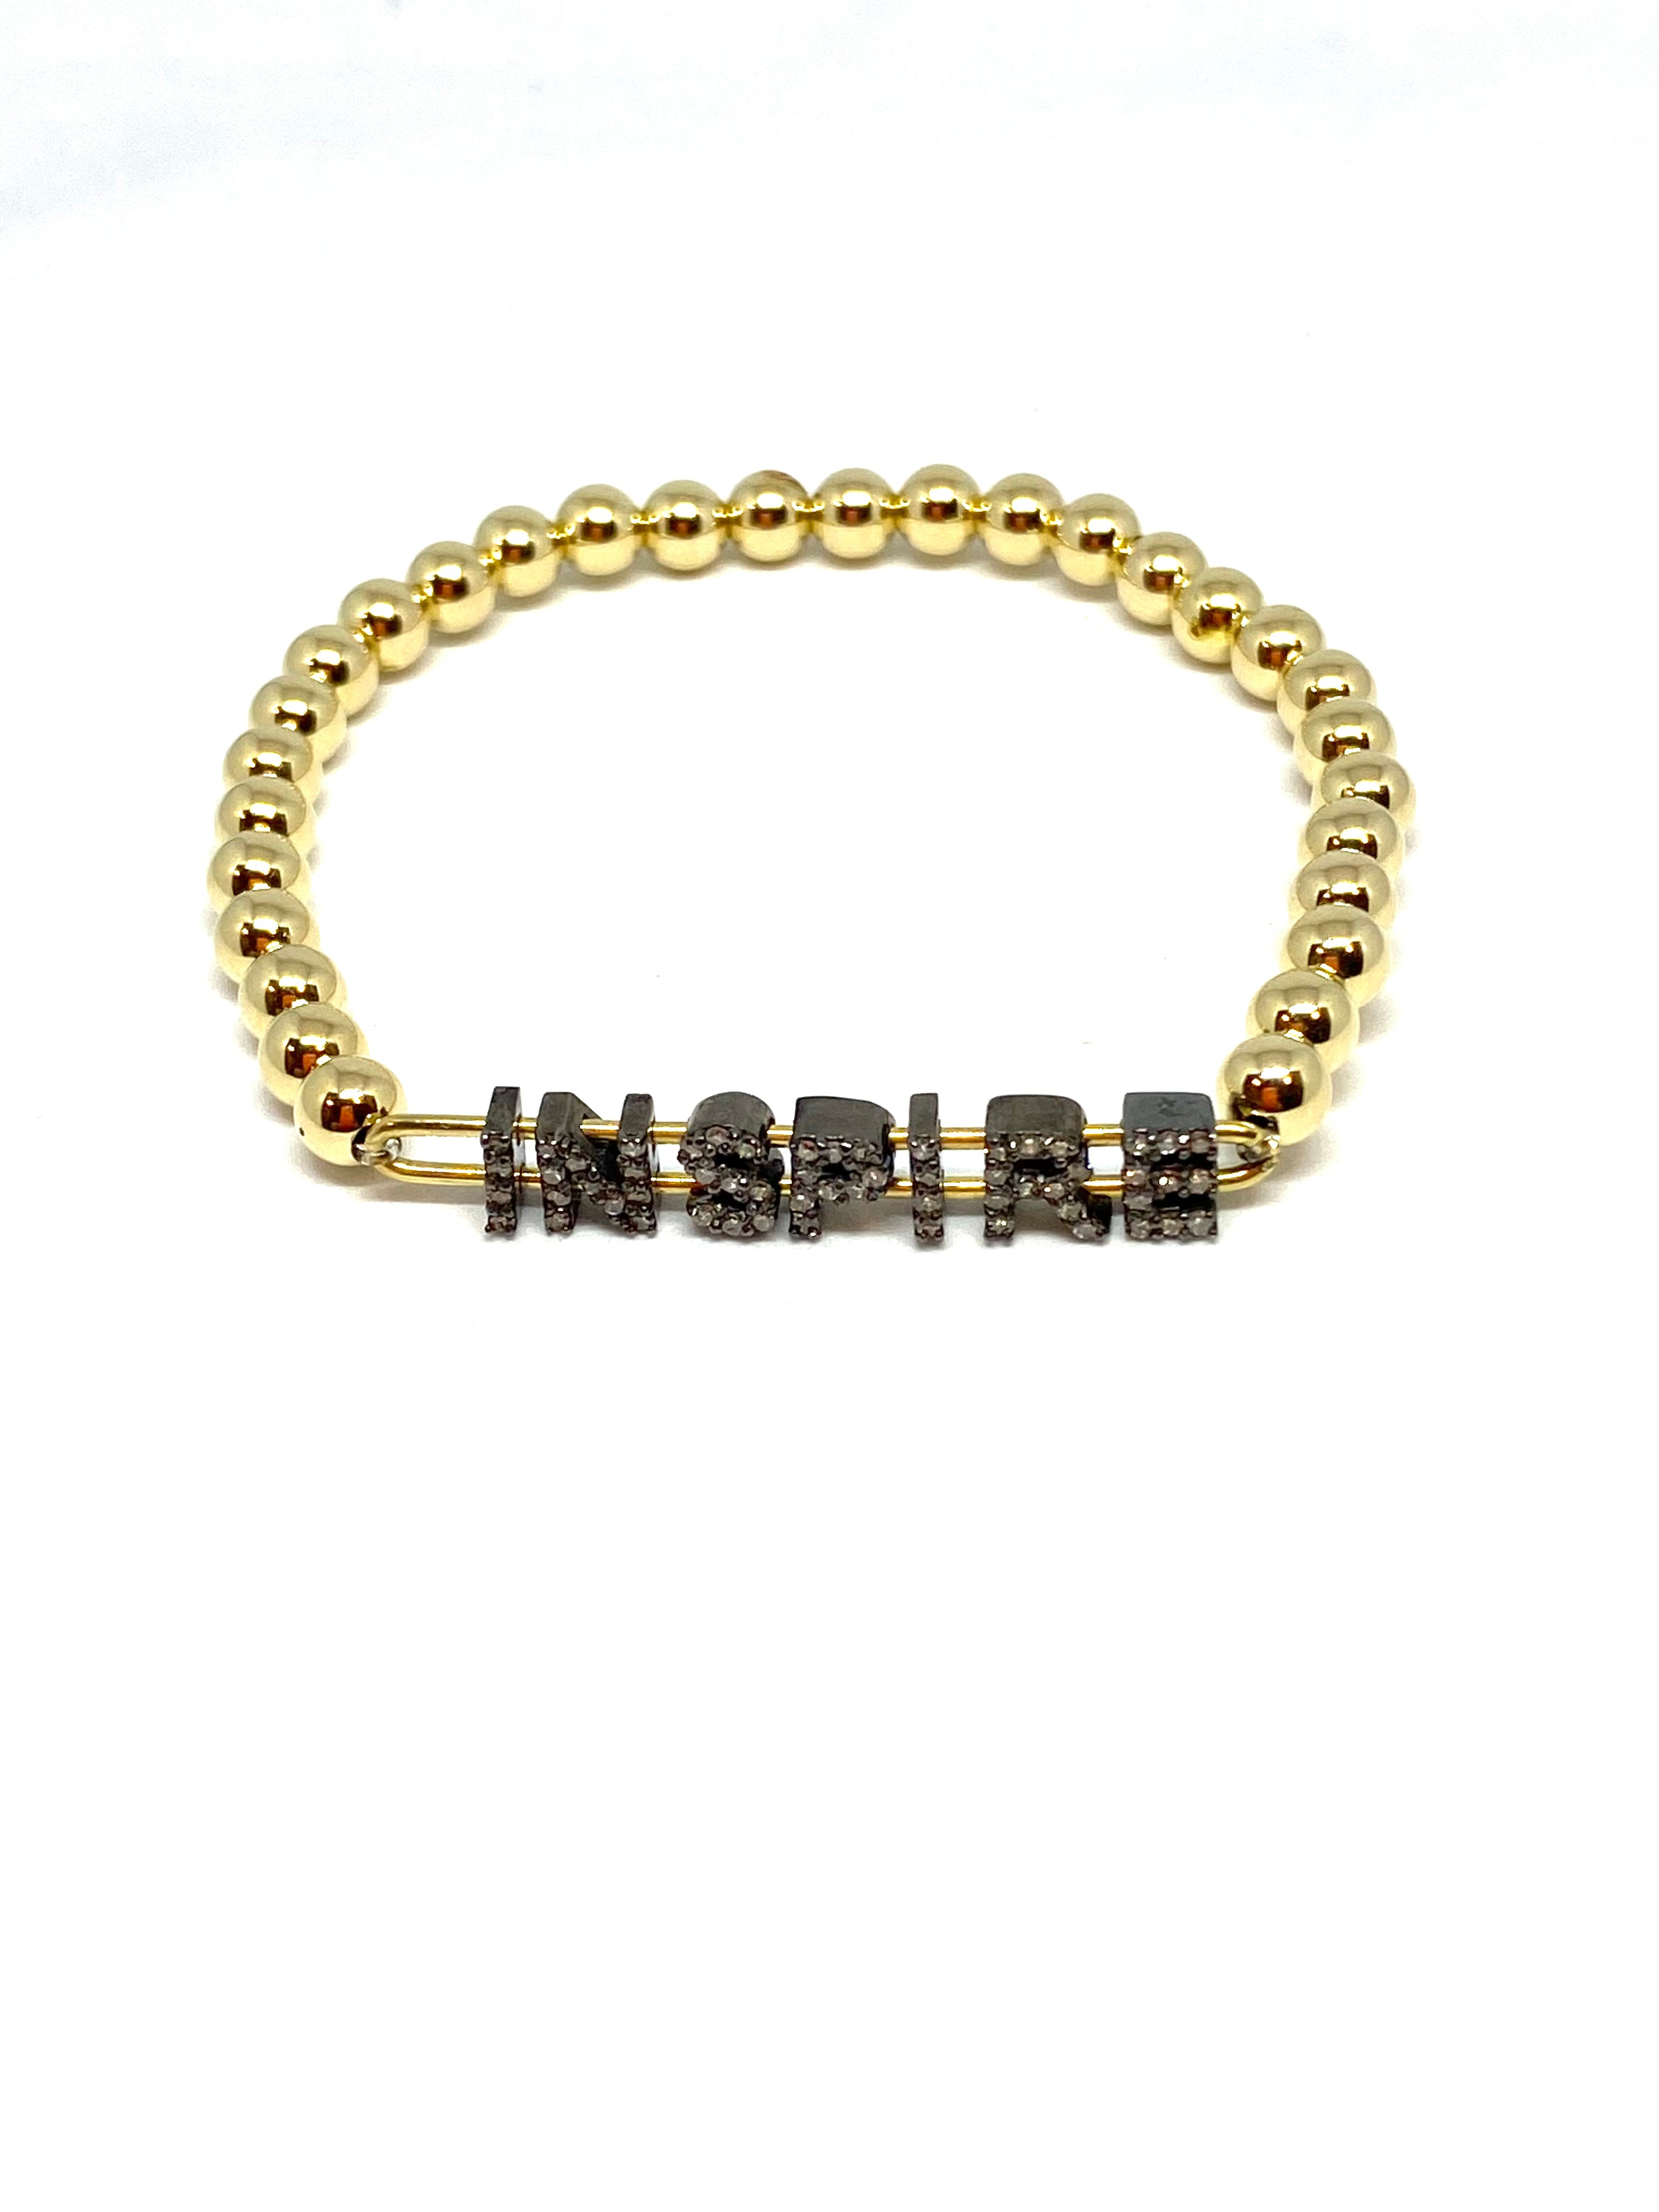 Nathan and moe inspire ID Bracelet with 5mm gold filled beads found at Patricia in Southern Pines, NC